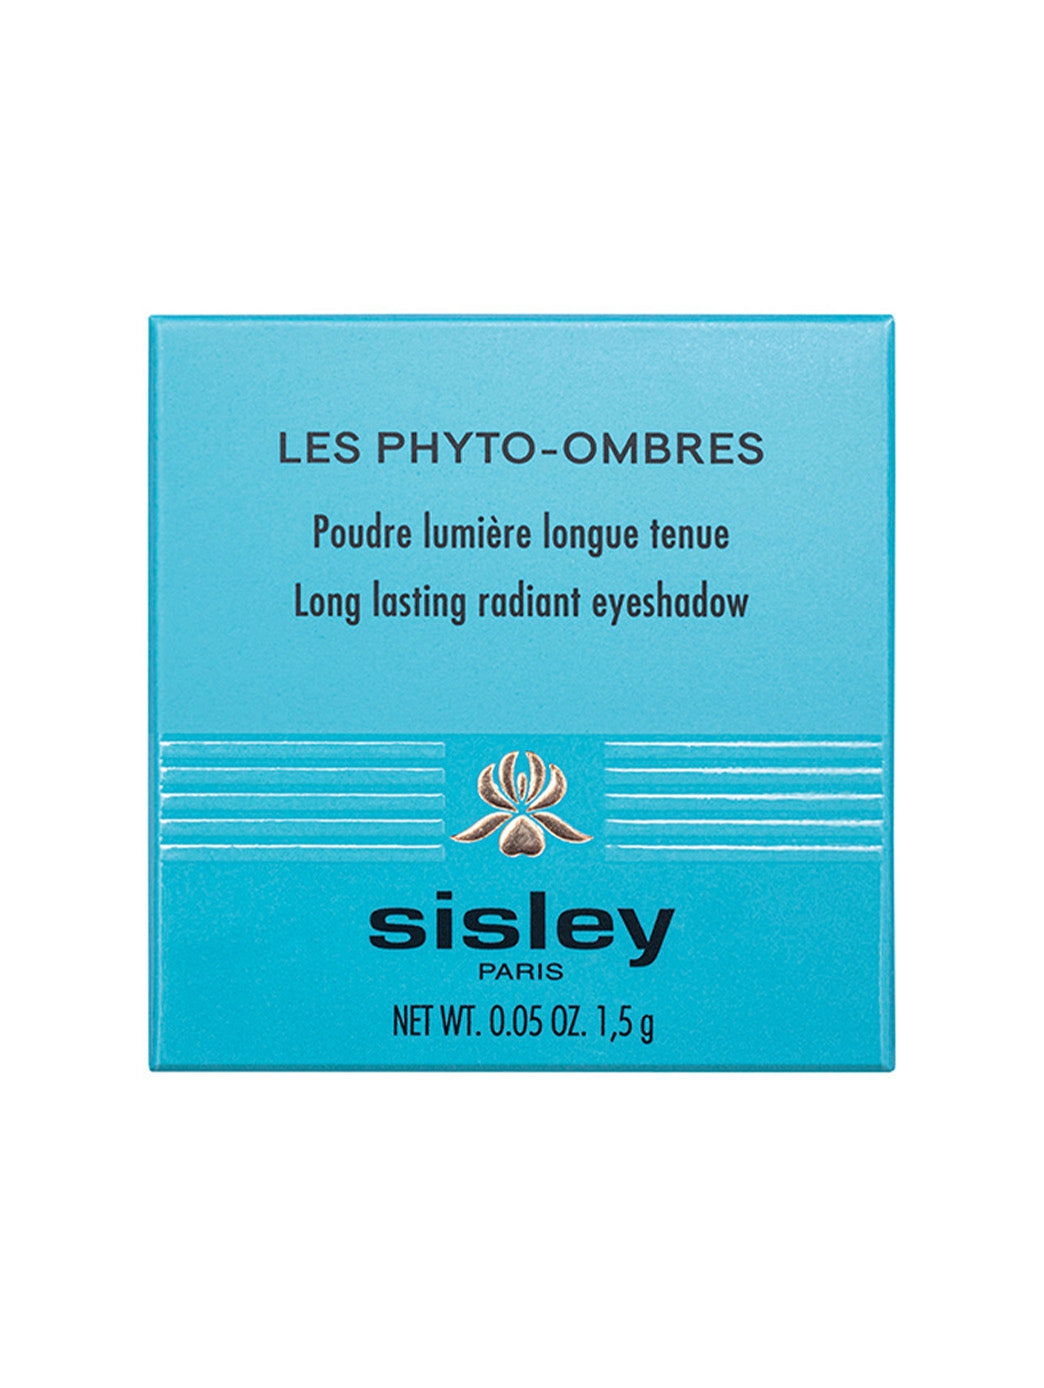 42472956559510 - Les Phyto-Ombres